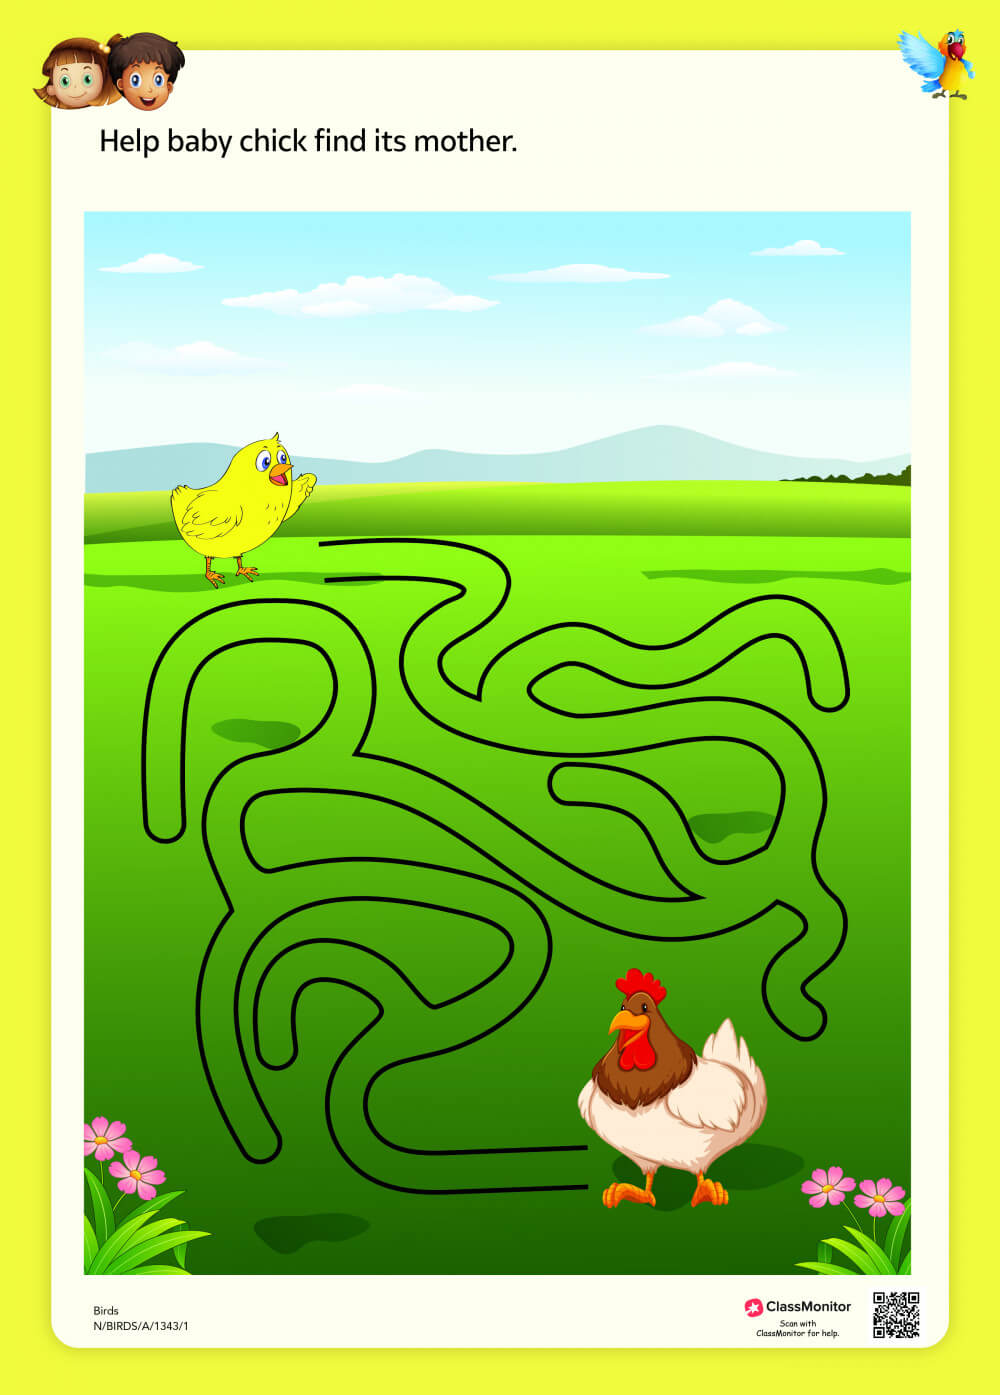 Worksheet - Help the Baby Chick Find Its Mother